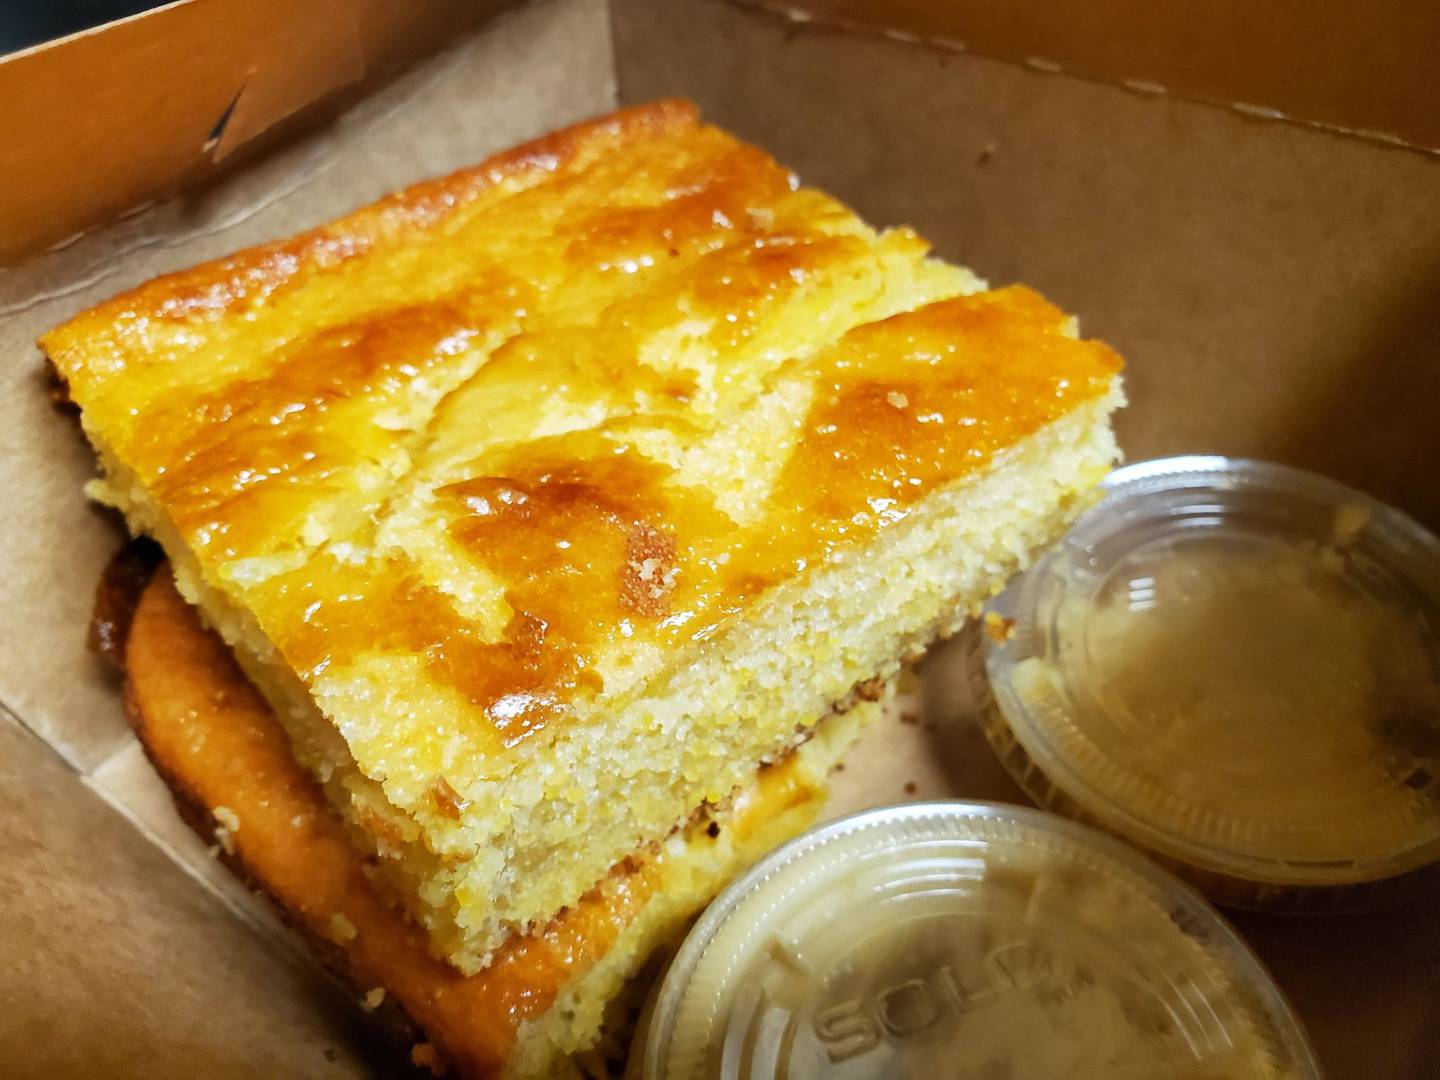 Station One Smokehouse in Plainfield serves its cornbread with a honey butter spread.